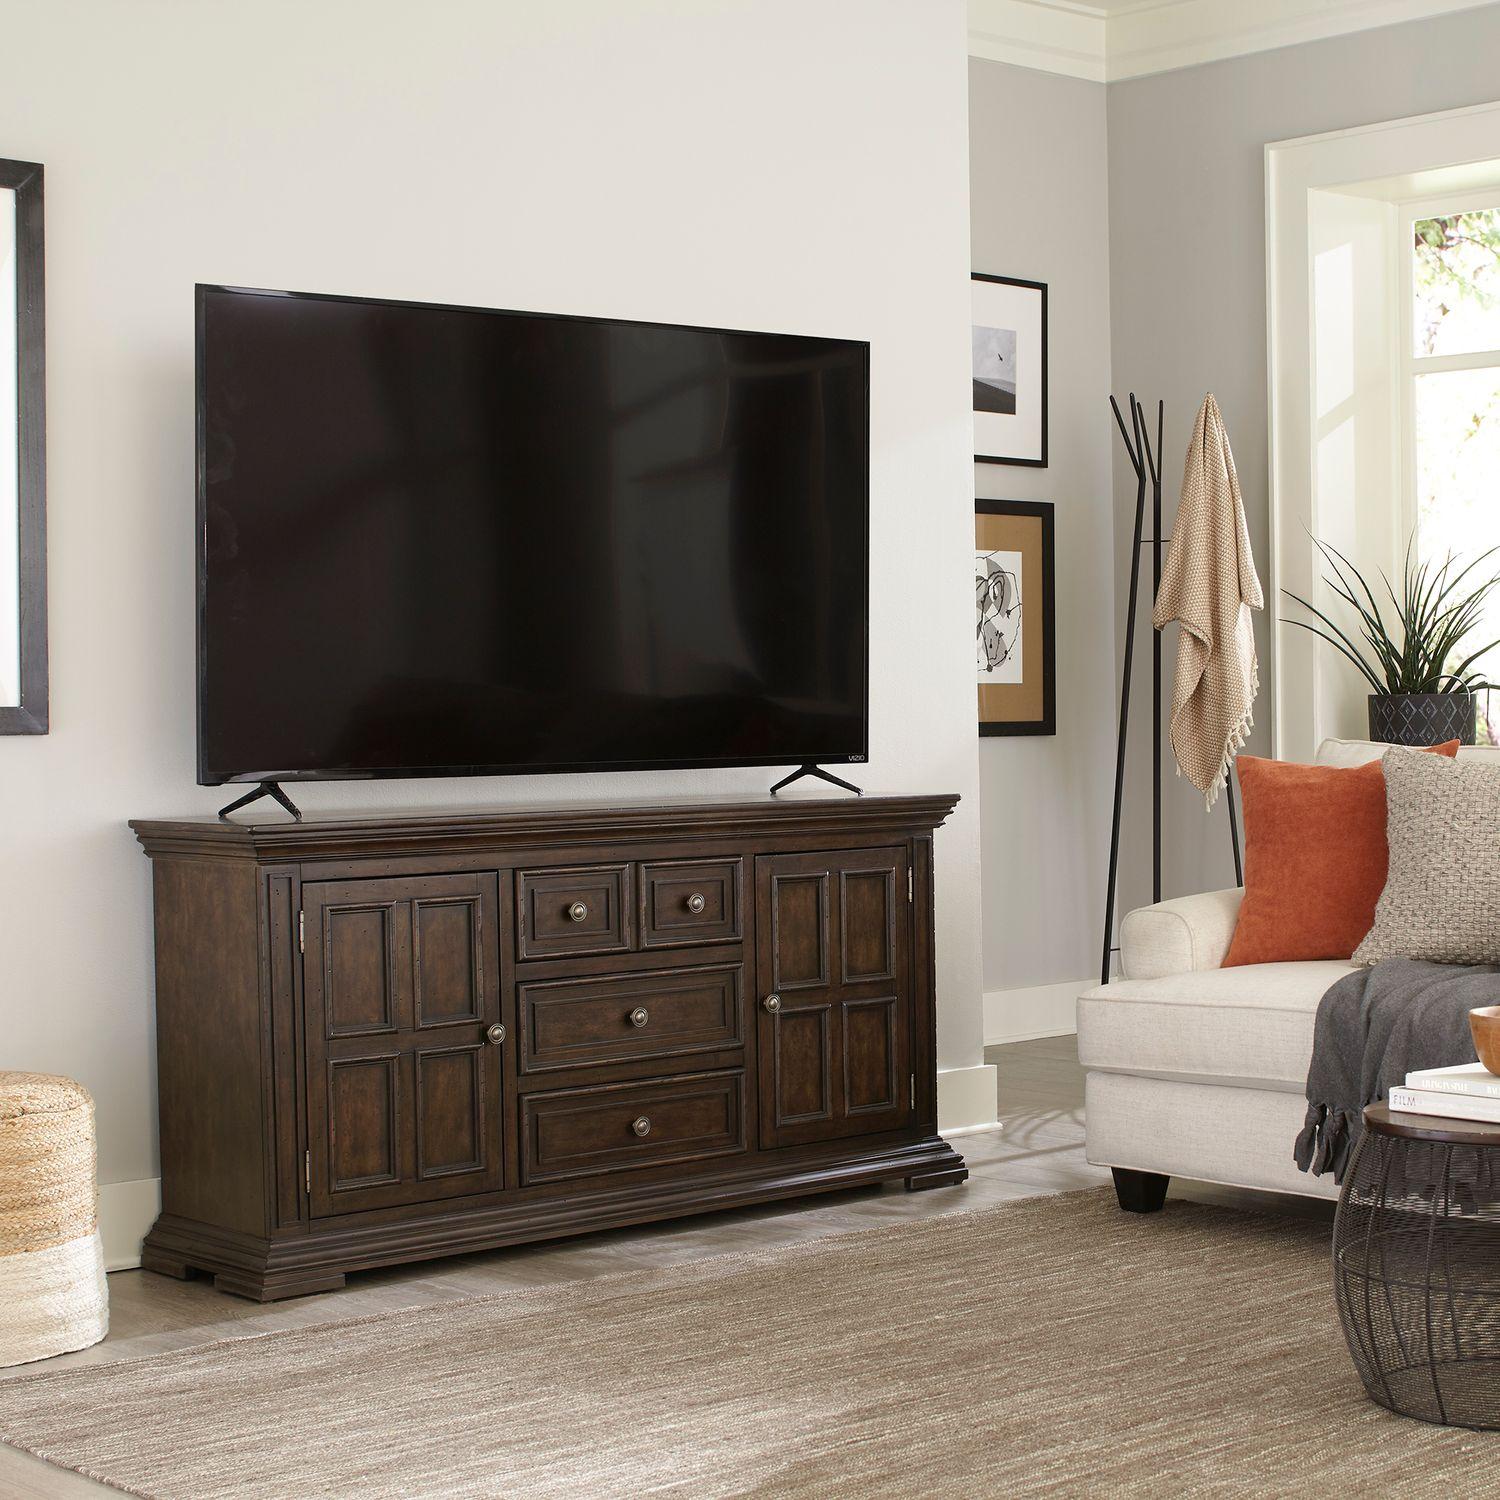 Transitional Tv Console Big Valley 361-TV66 361-TV66 in Brown 